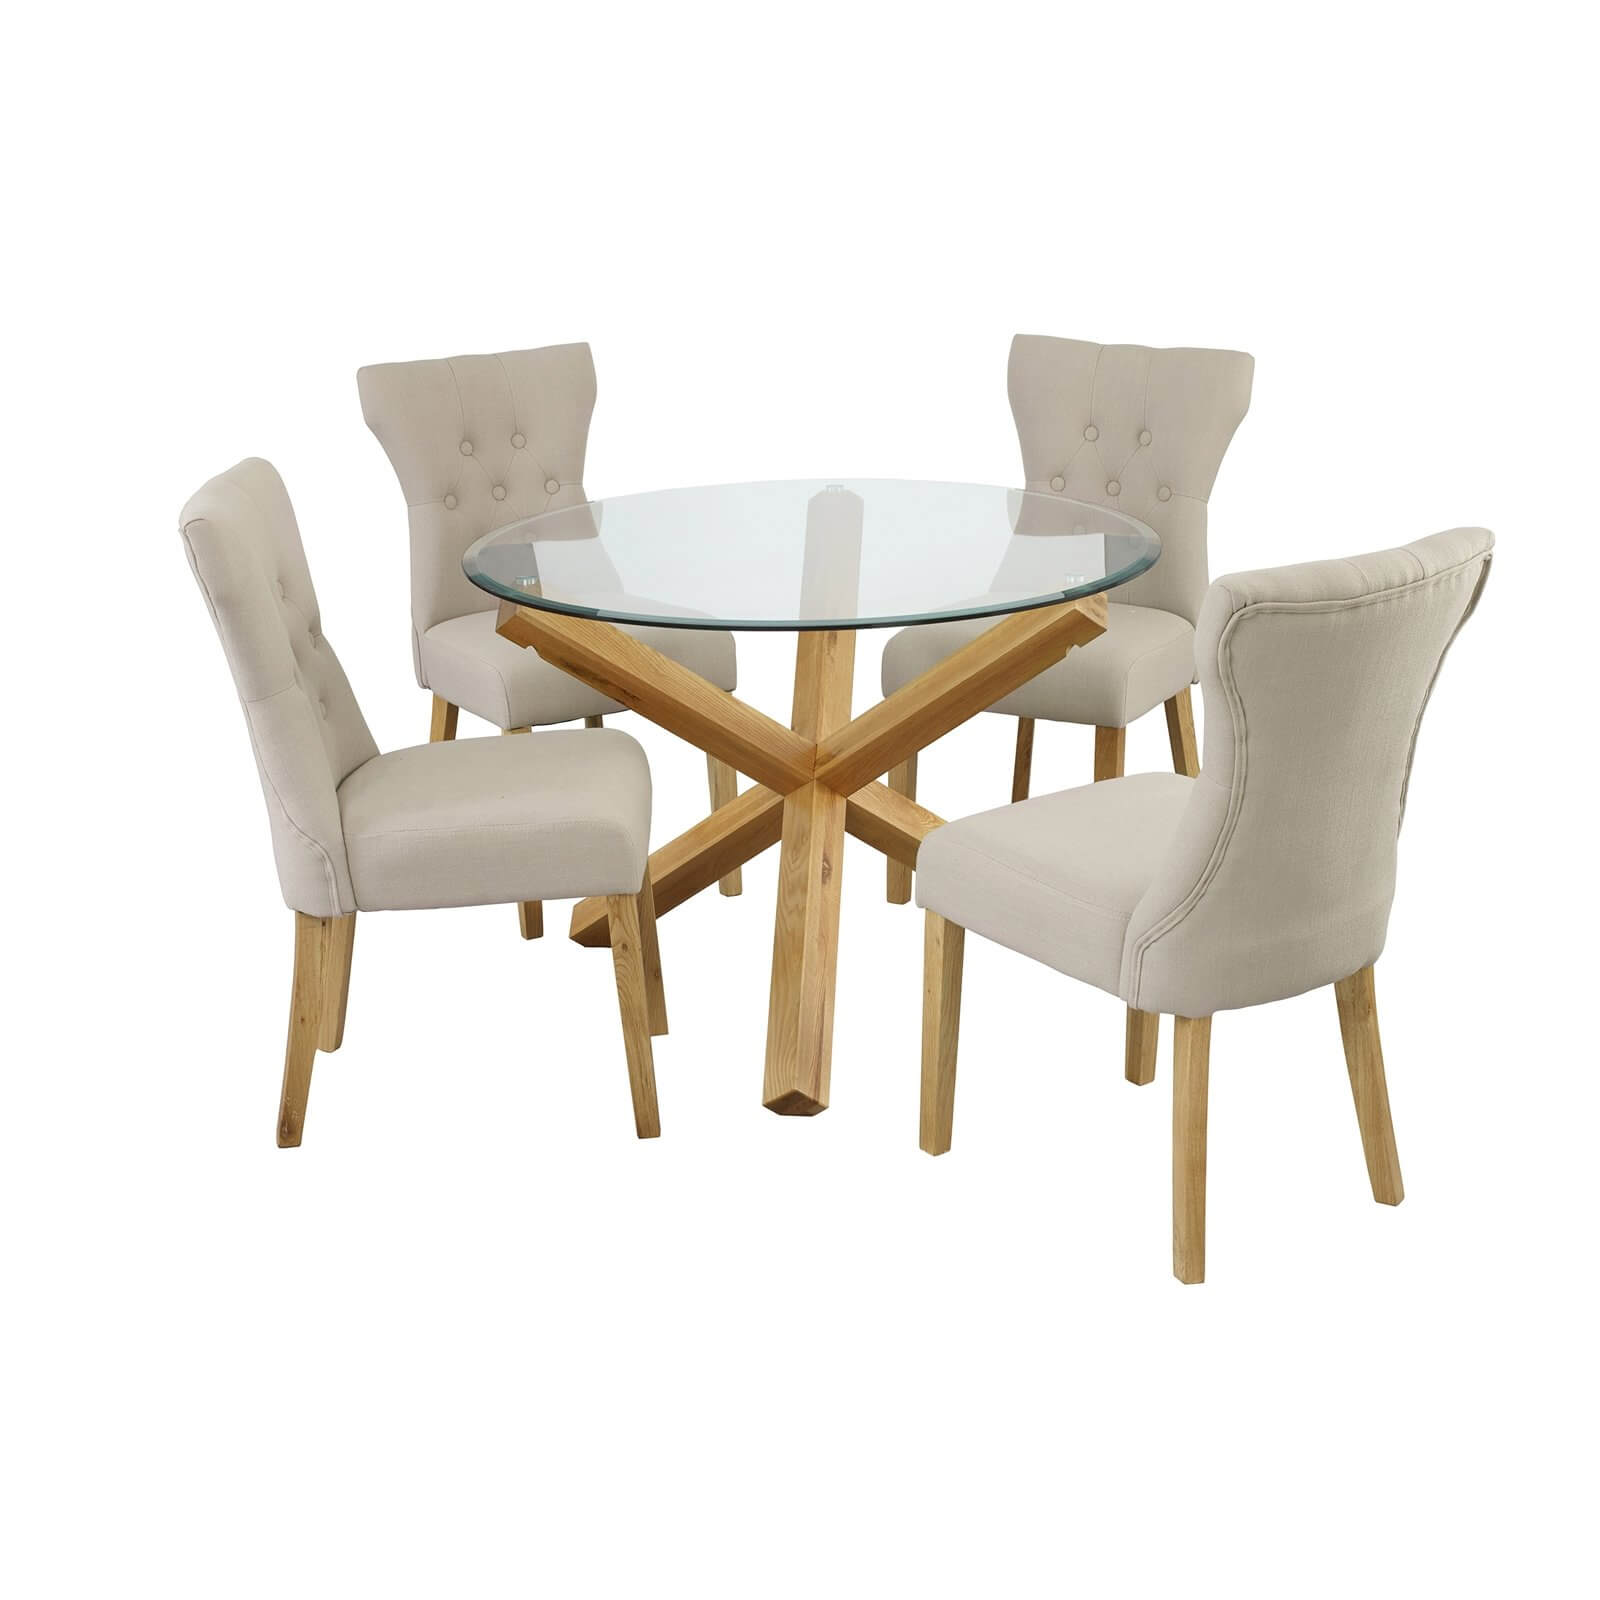 Oporto 4 Seater Dining Set - Naples Dining Chairs - Beige